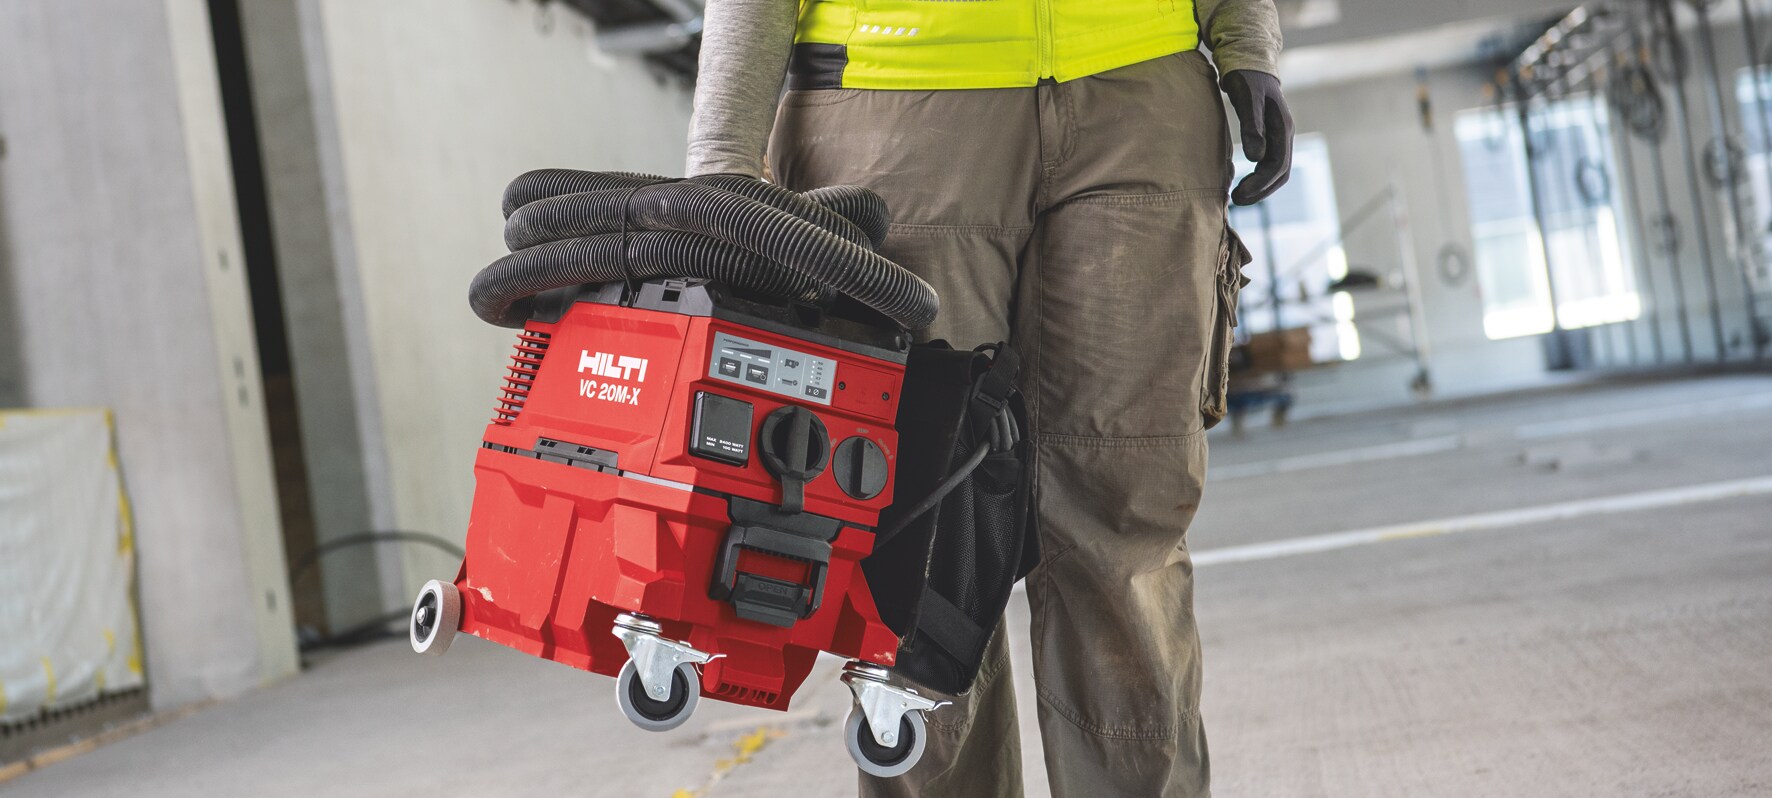 Hilti Smart vacuums for every jobsite